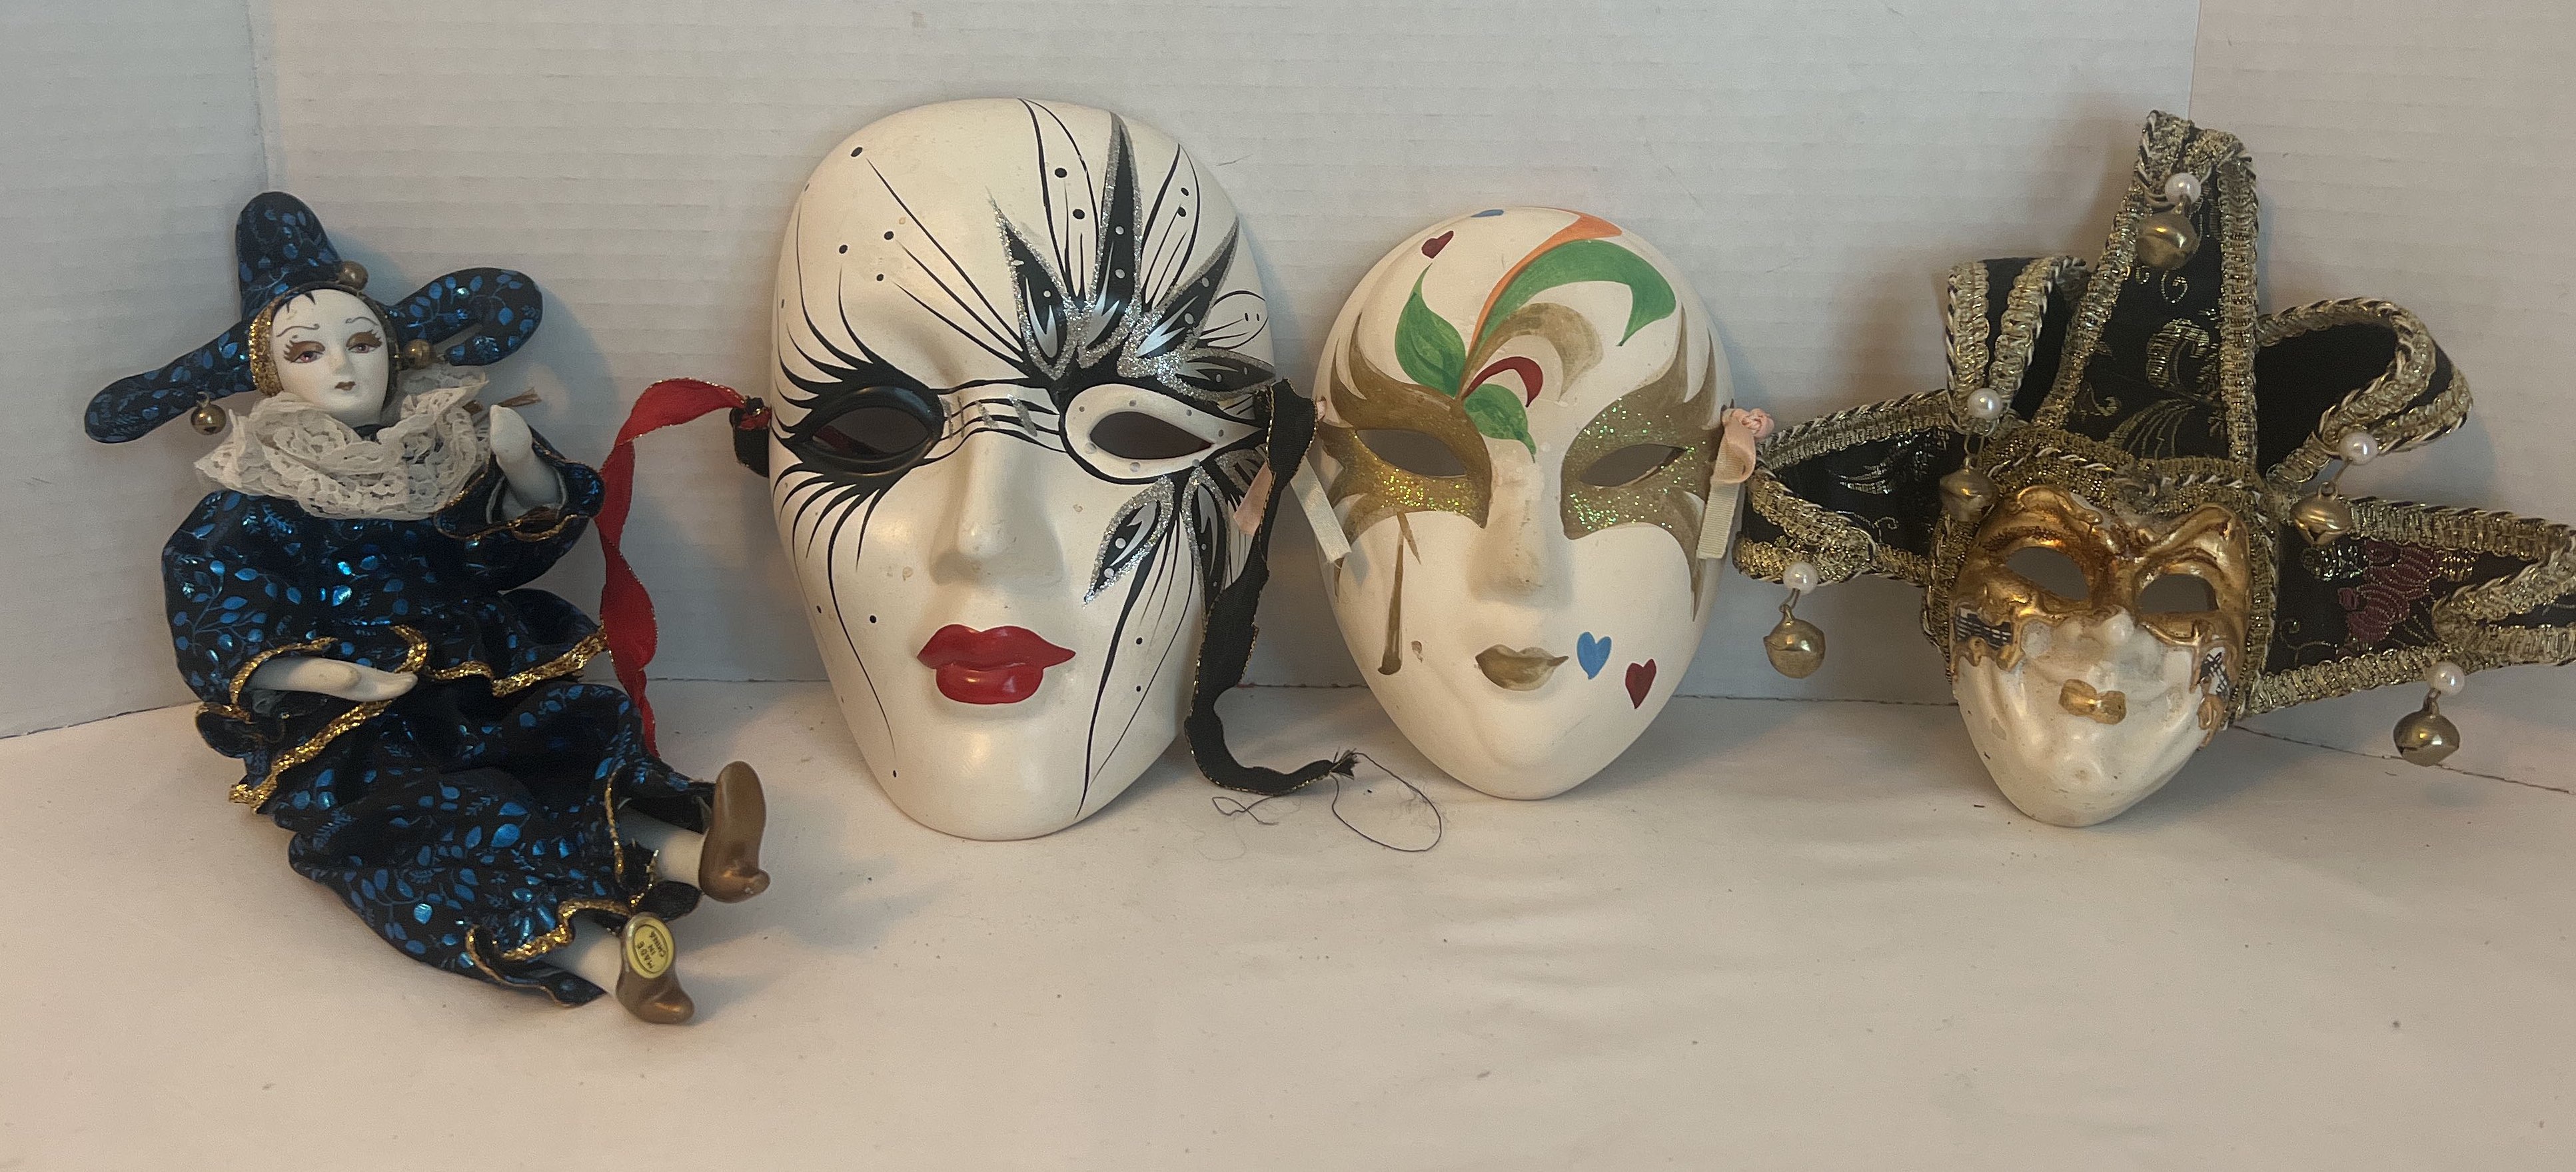 Ceramic Decorative Music Mask Made in Venice For Sale on Ruby Lane